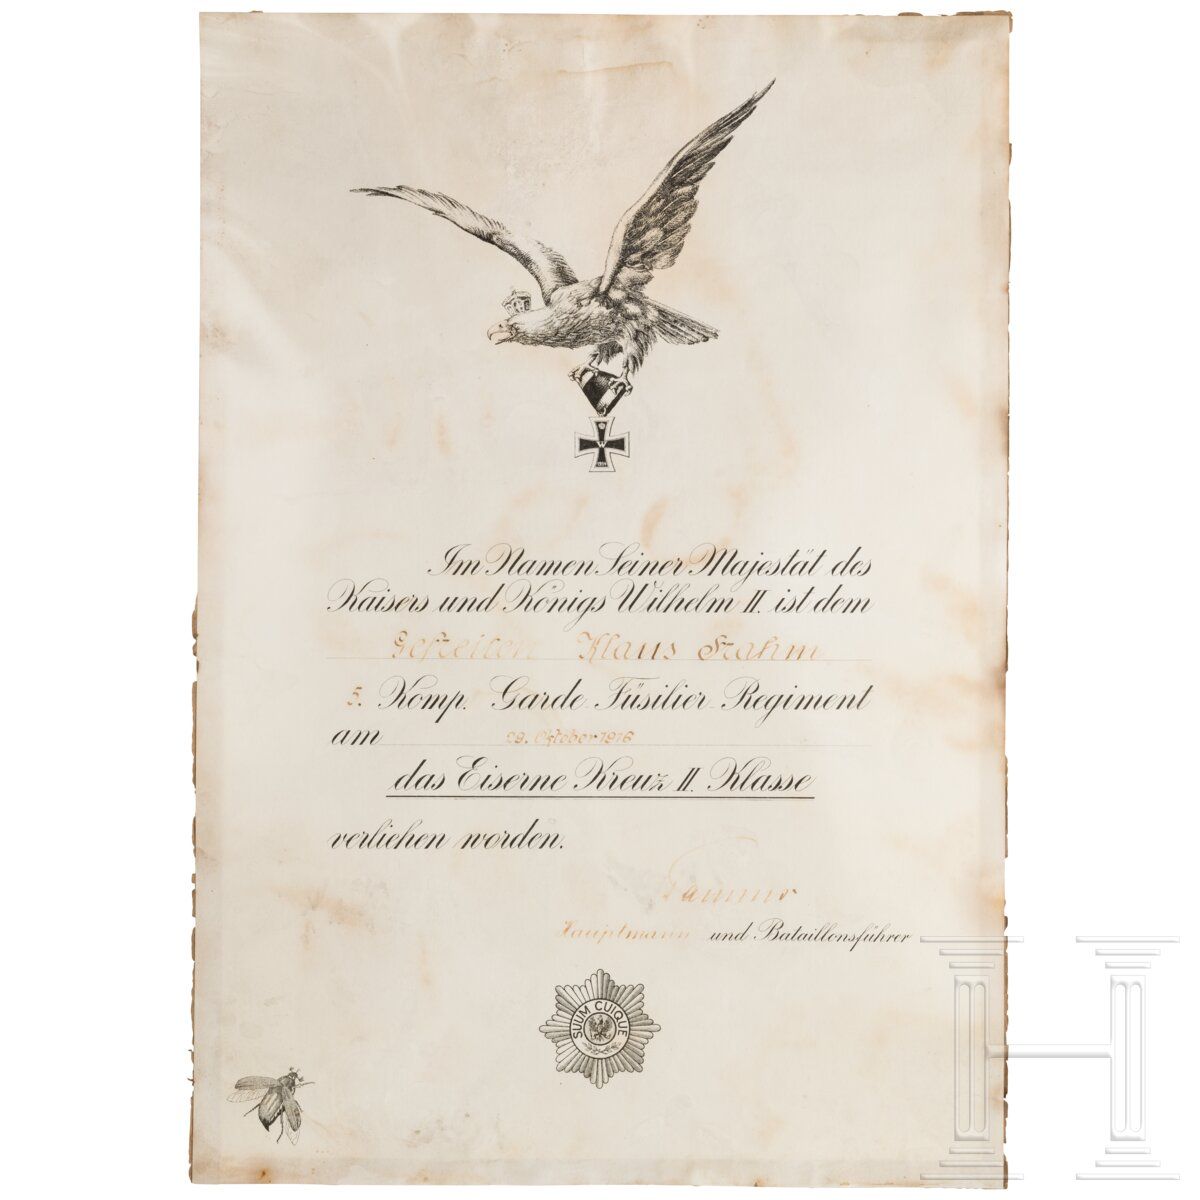 Null Regimental form with imperial eagle, guards star and the regiment's cockcha&hellip;